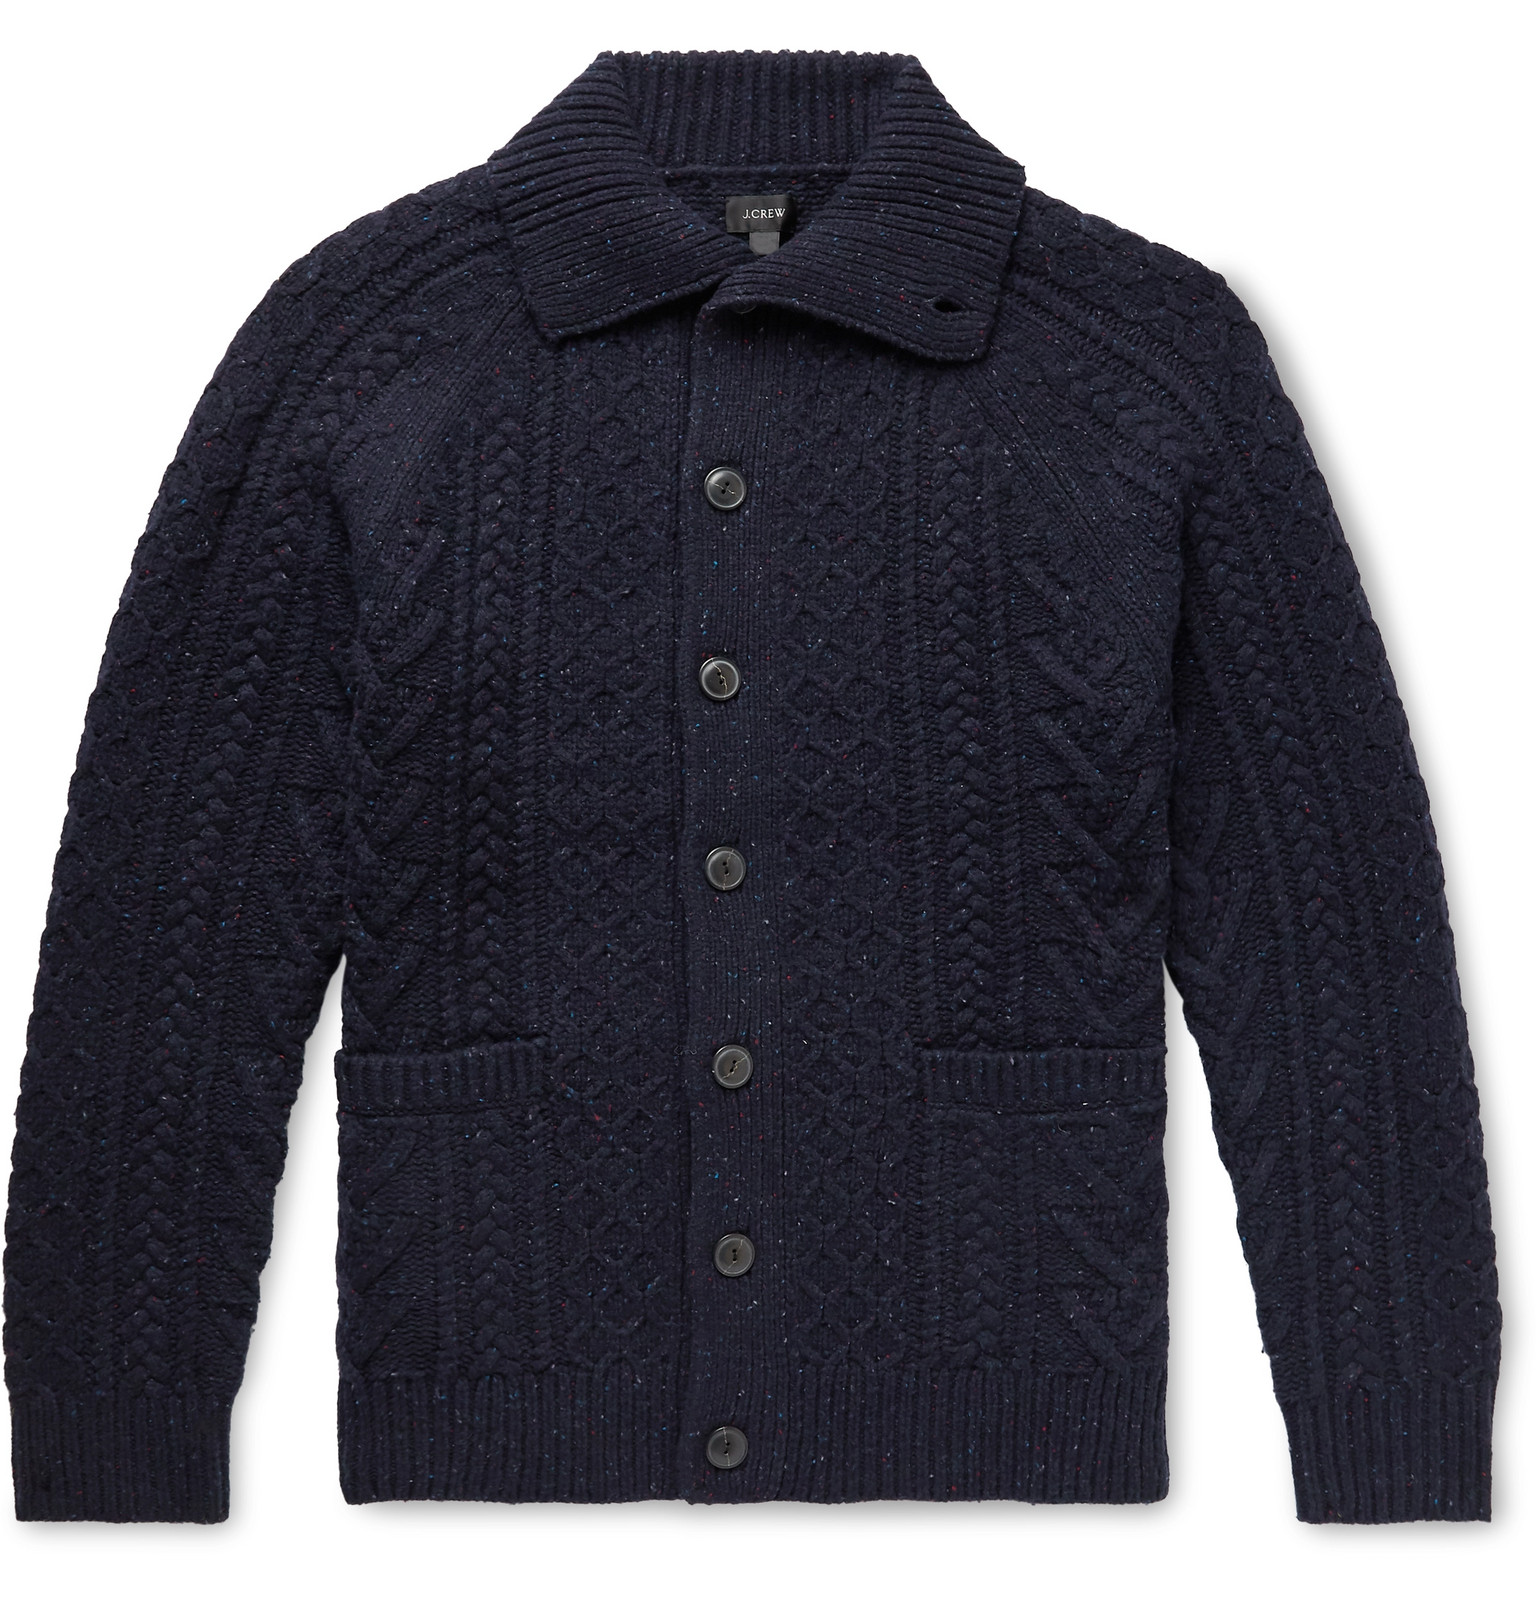 J.Crew - Cable-Knit Donegal Merino Wool-Blend Cardigan - Men - Blue ...